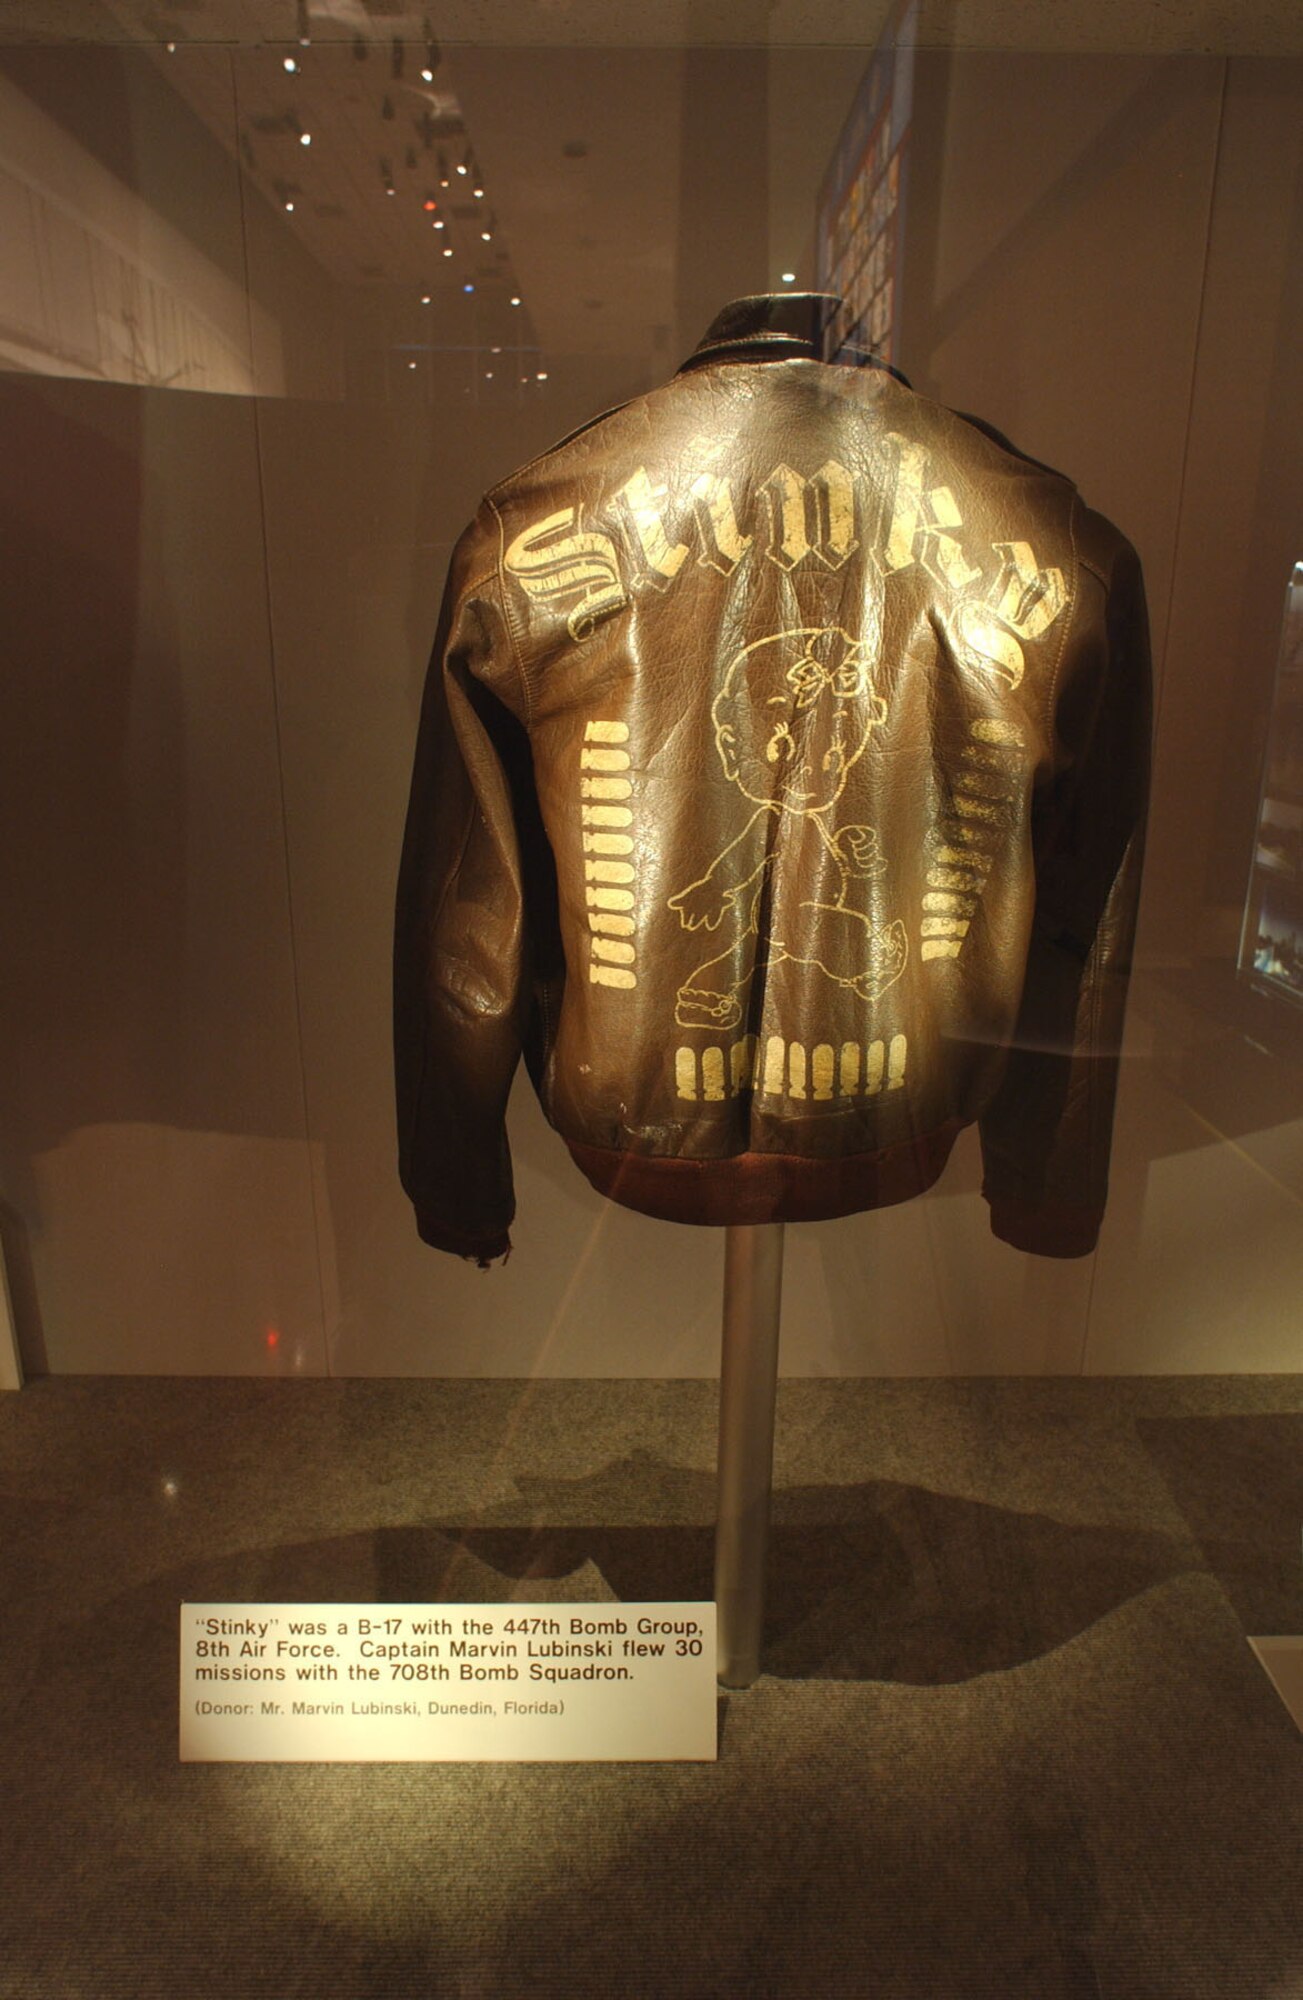 DAYTON, Ohio -- "Stinky" aviator jacket on display at the National Museum of the United States Air Force. (U.S. Air Force photo)